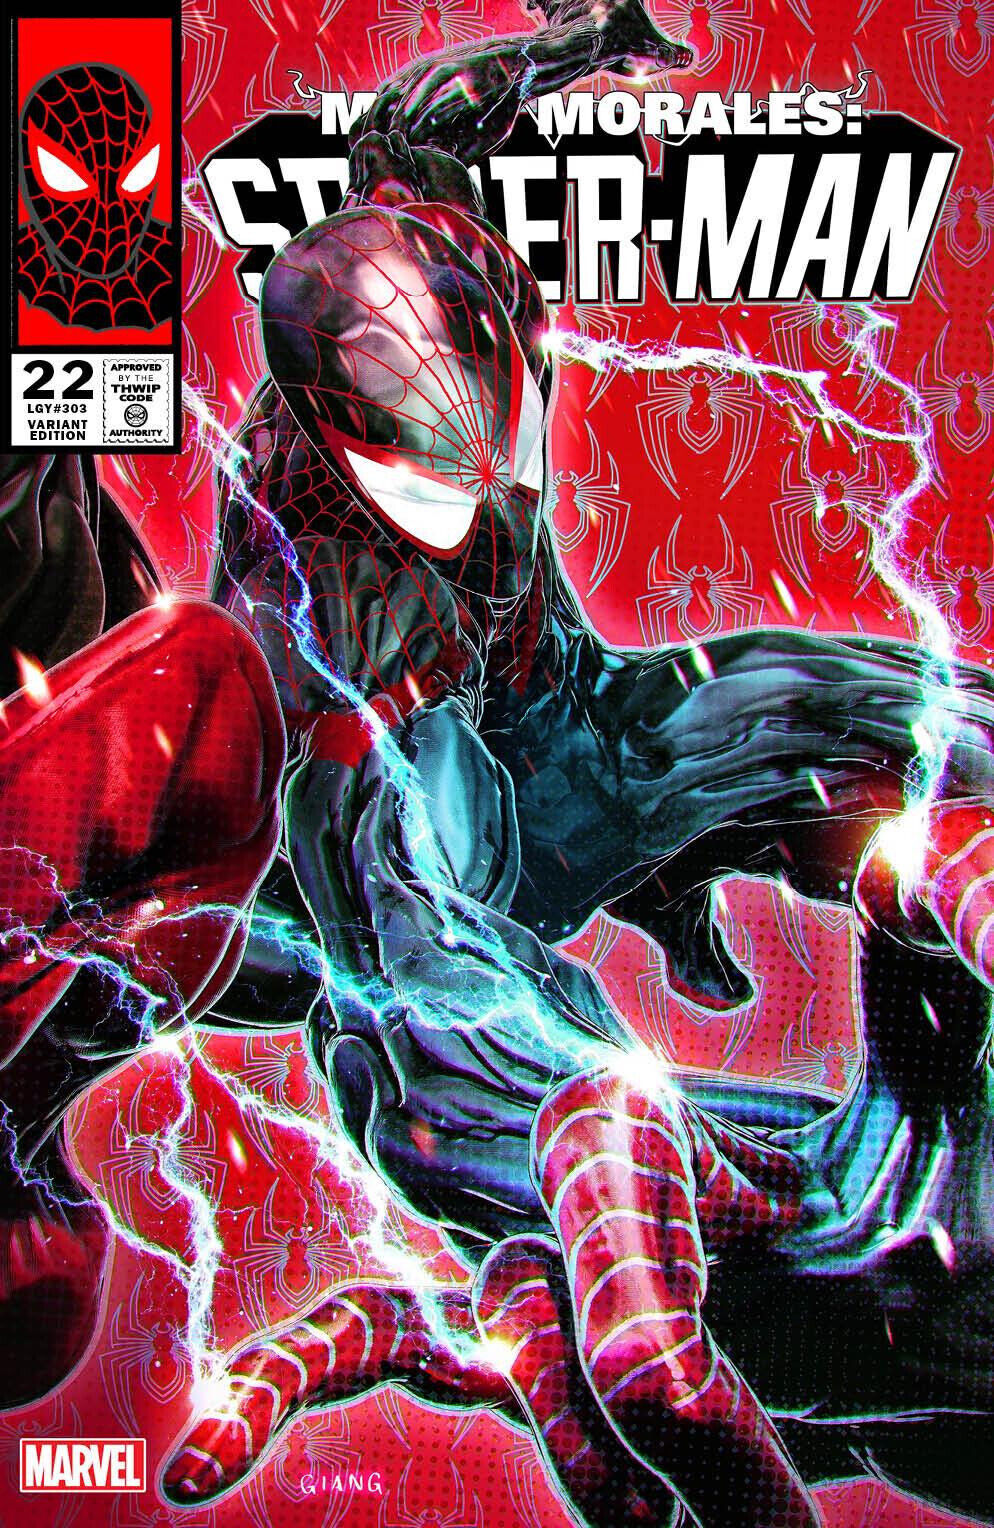 MILES MORALES: SPIDER-MAN #22 (JOHN GIANG EXCLUSIVE VARIANT) COMIC ~ Marvel